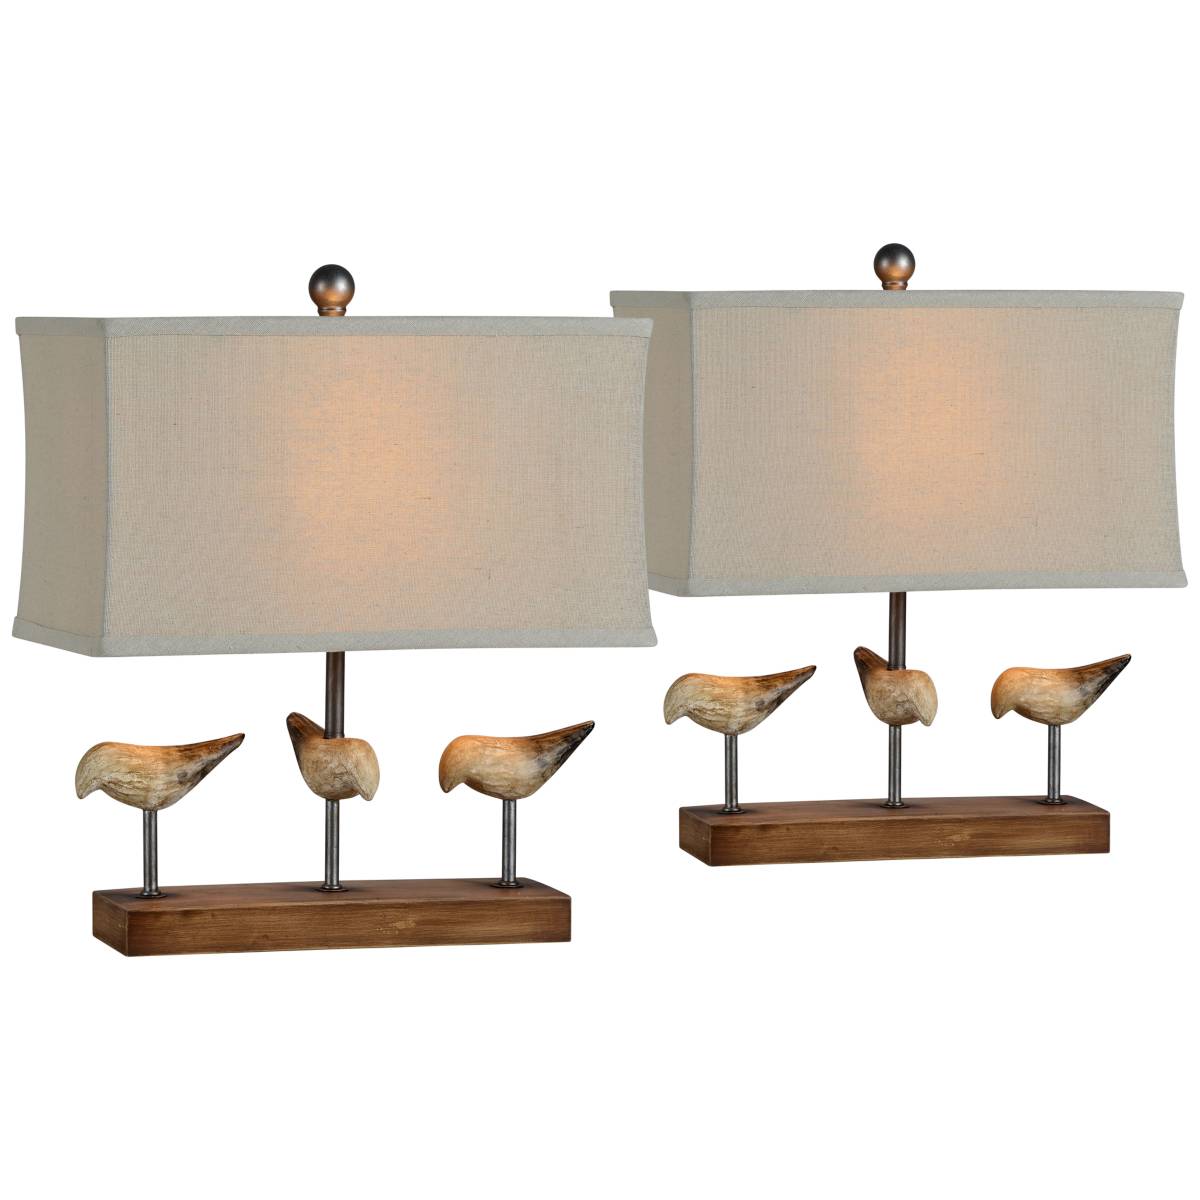 Rustic Table Lamps for Bedroom and More - Page 8 | Lamps Plus